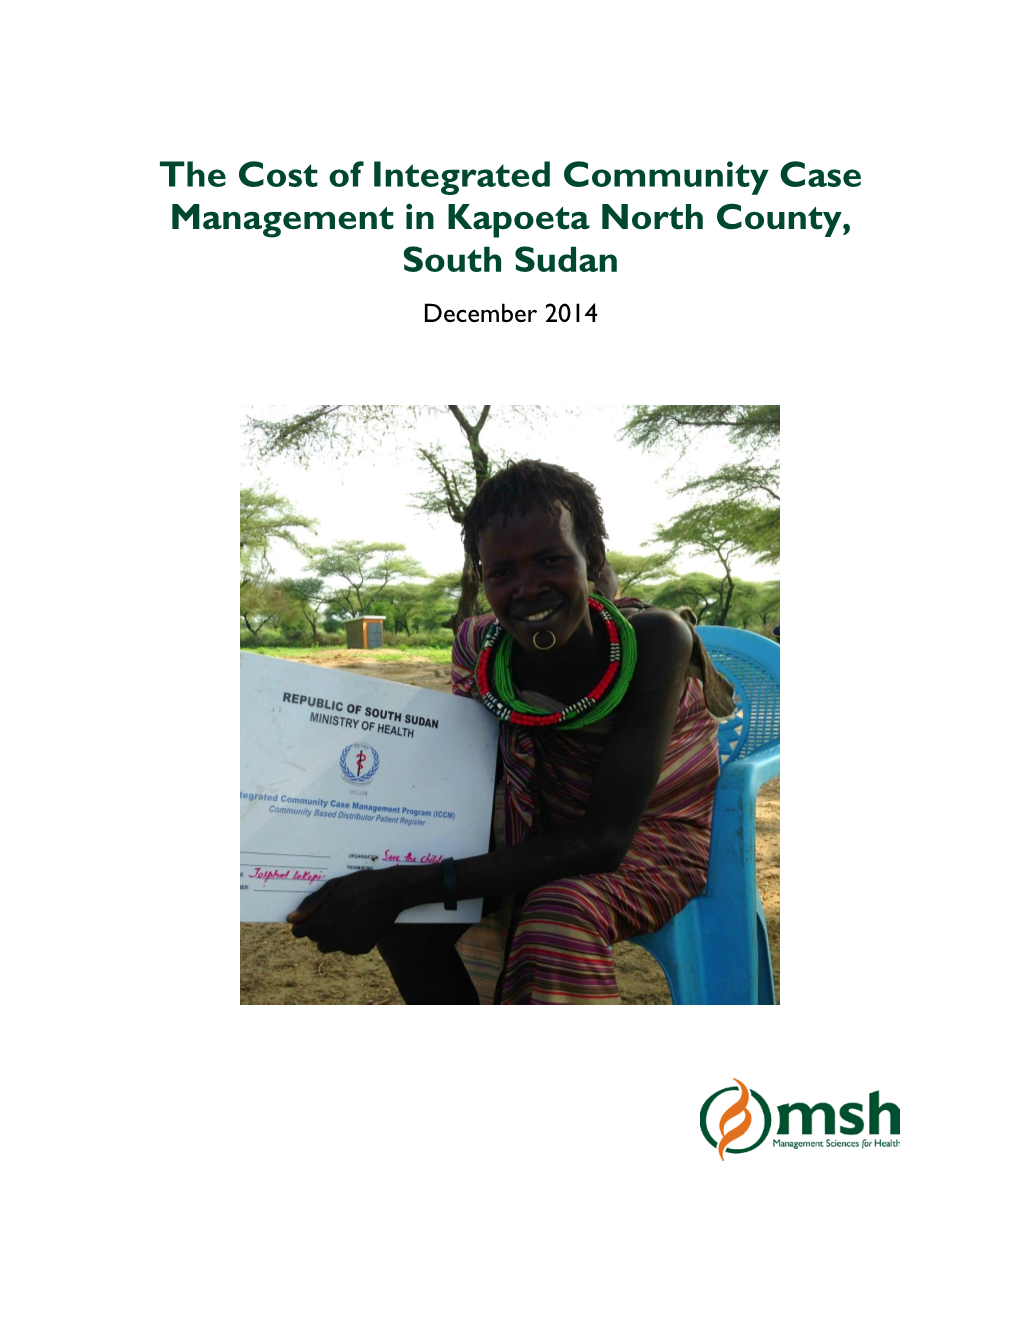 The Cost of Integrated Community Case Management in Kapoeta North County, South Sudan December 2014